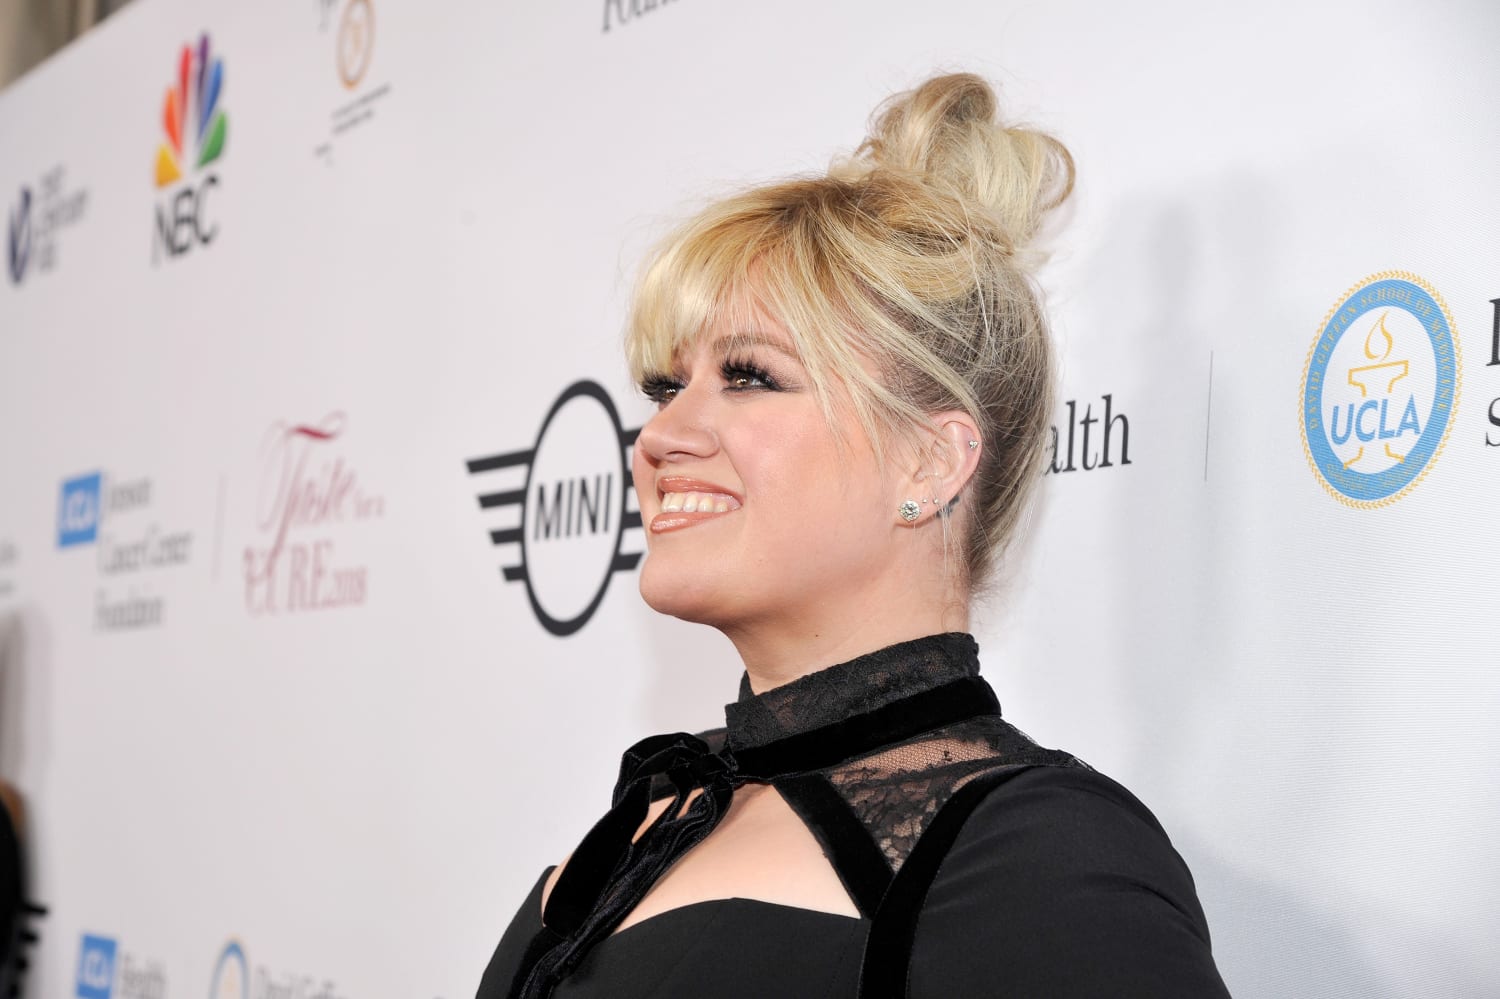 Kelly Clarkson's hair has bangs and a platinum color now